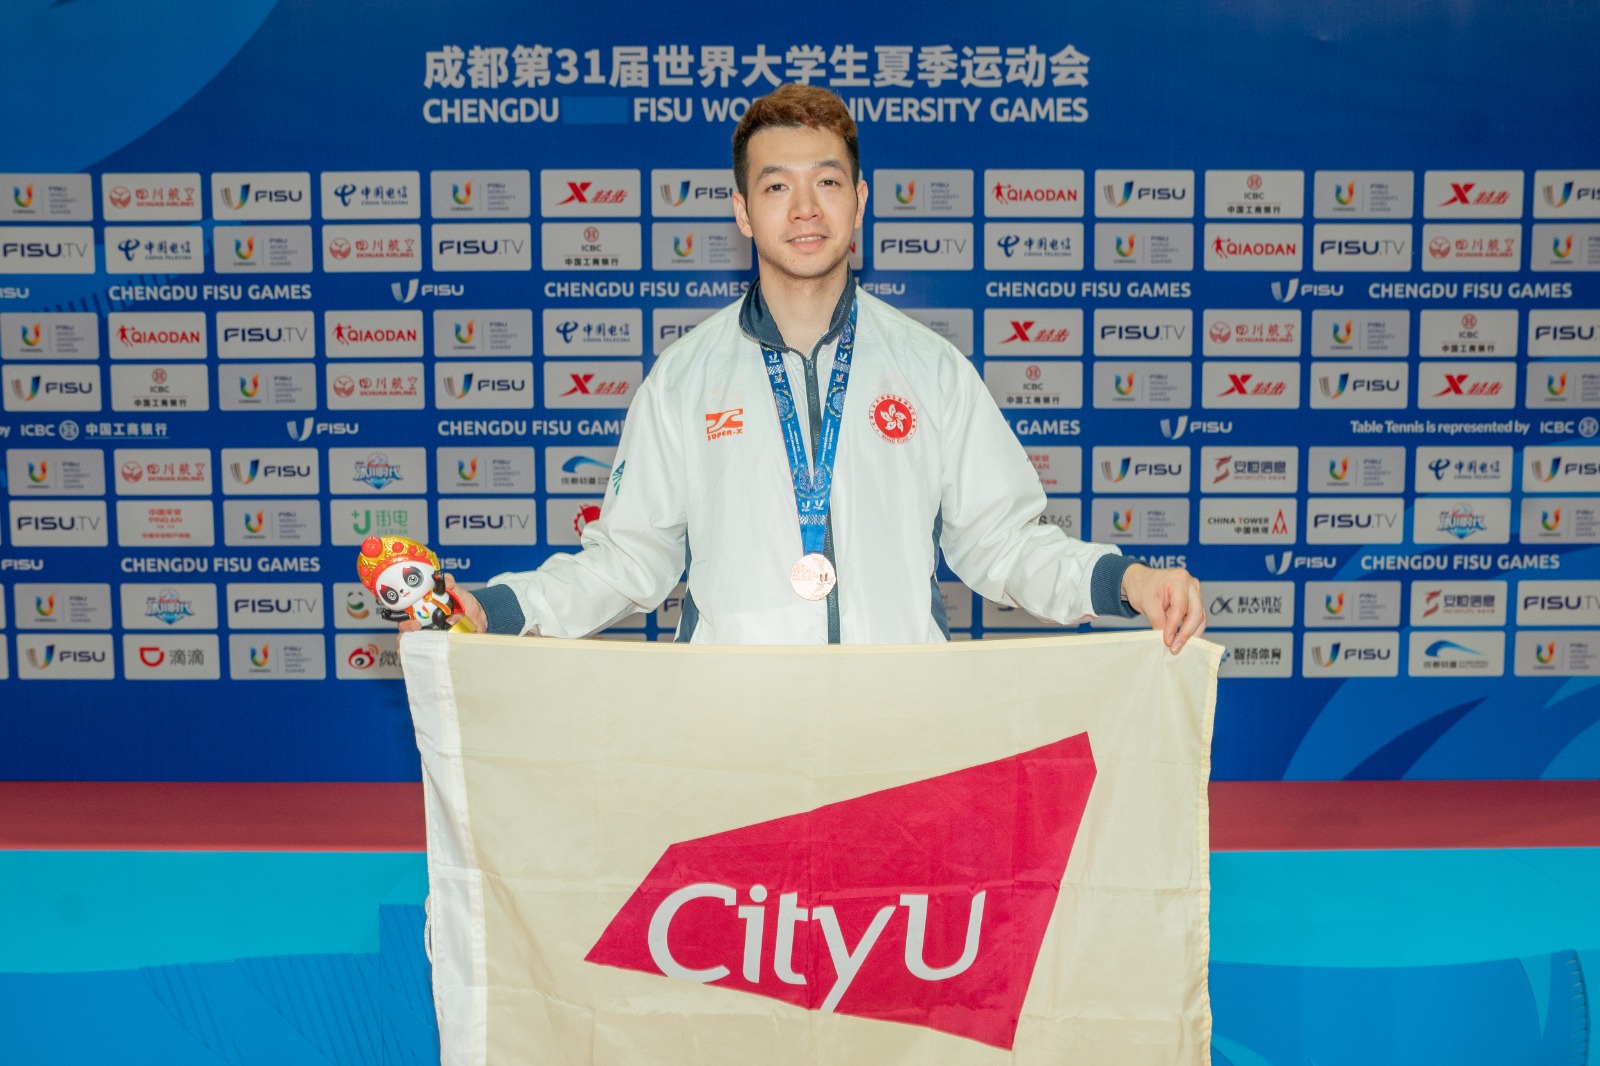 CLASS Student Wins Table Tennis Bronze at World University Games 